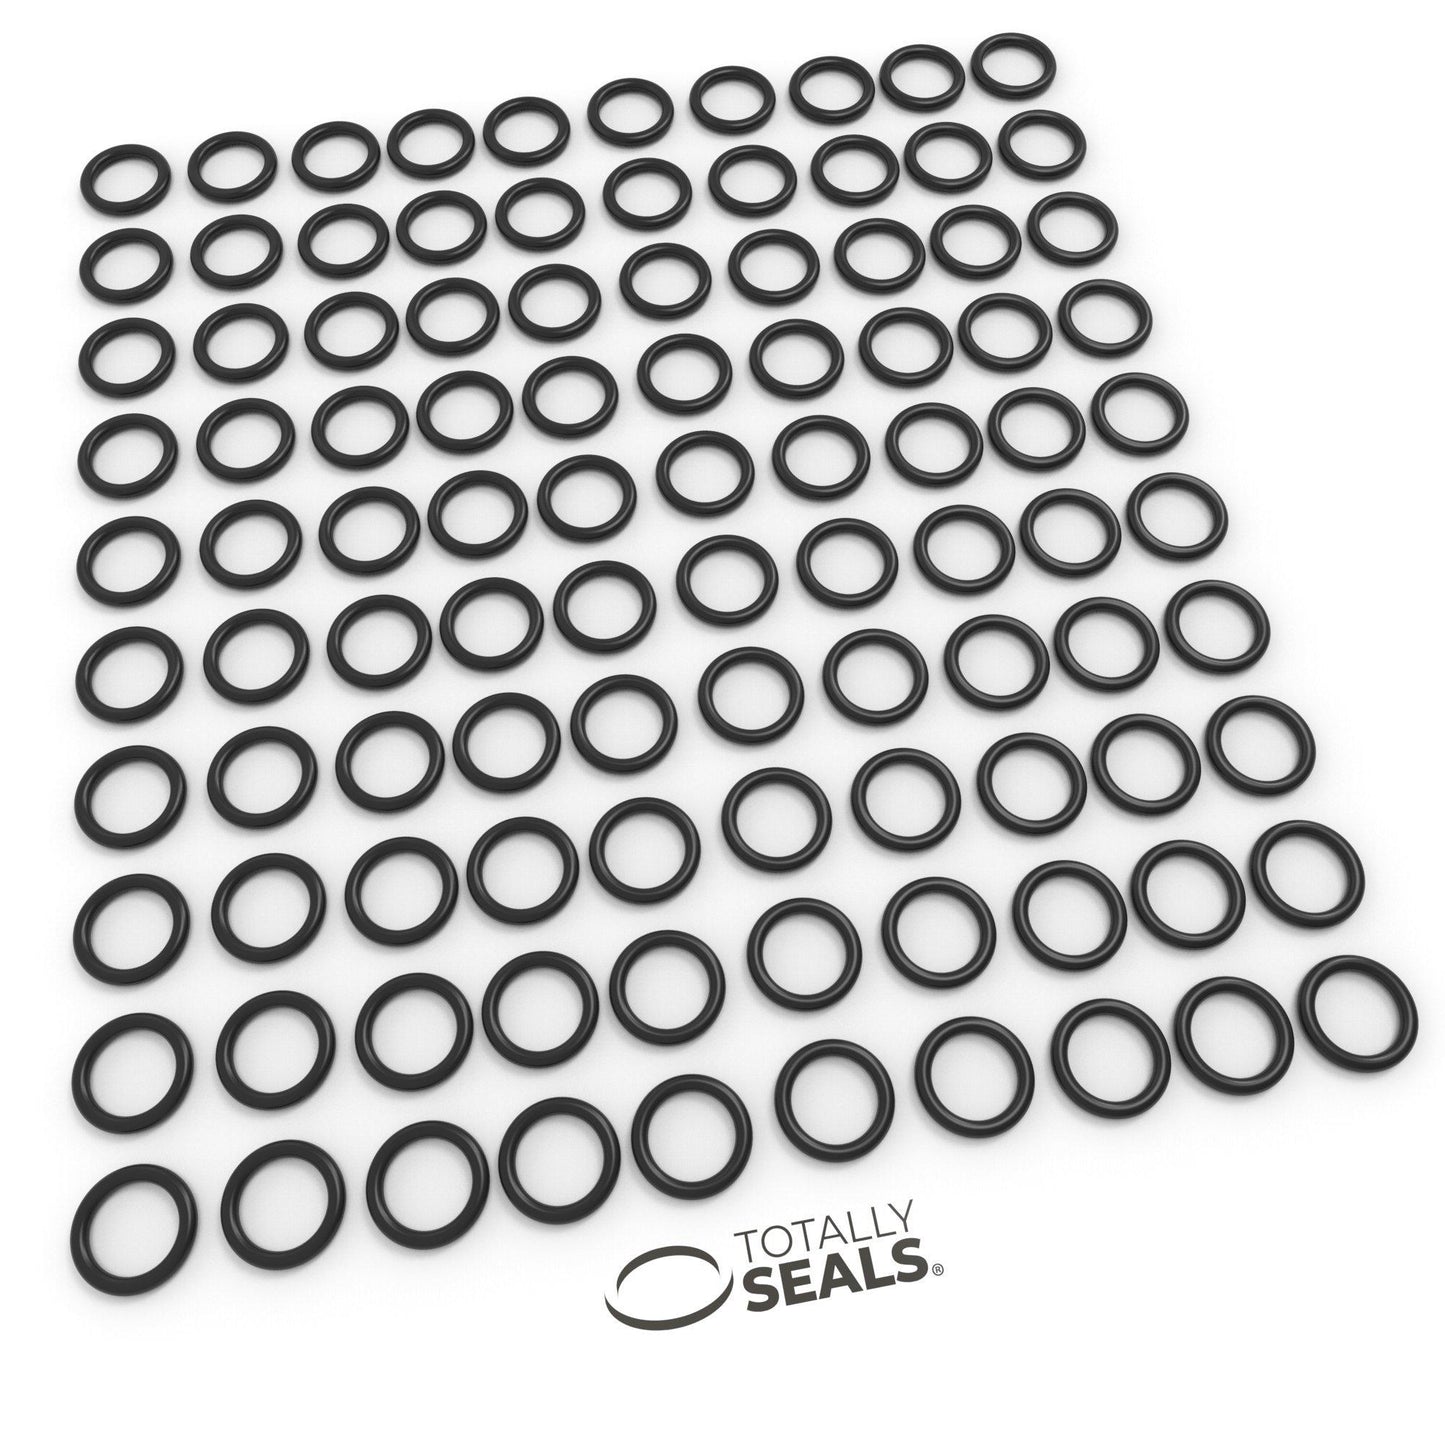 35mm x 2mm (39mm OD) Nitrile O-Rings - Totally Seals®